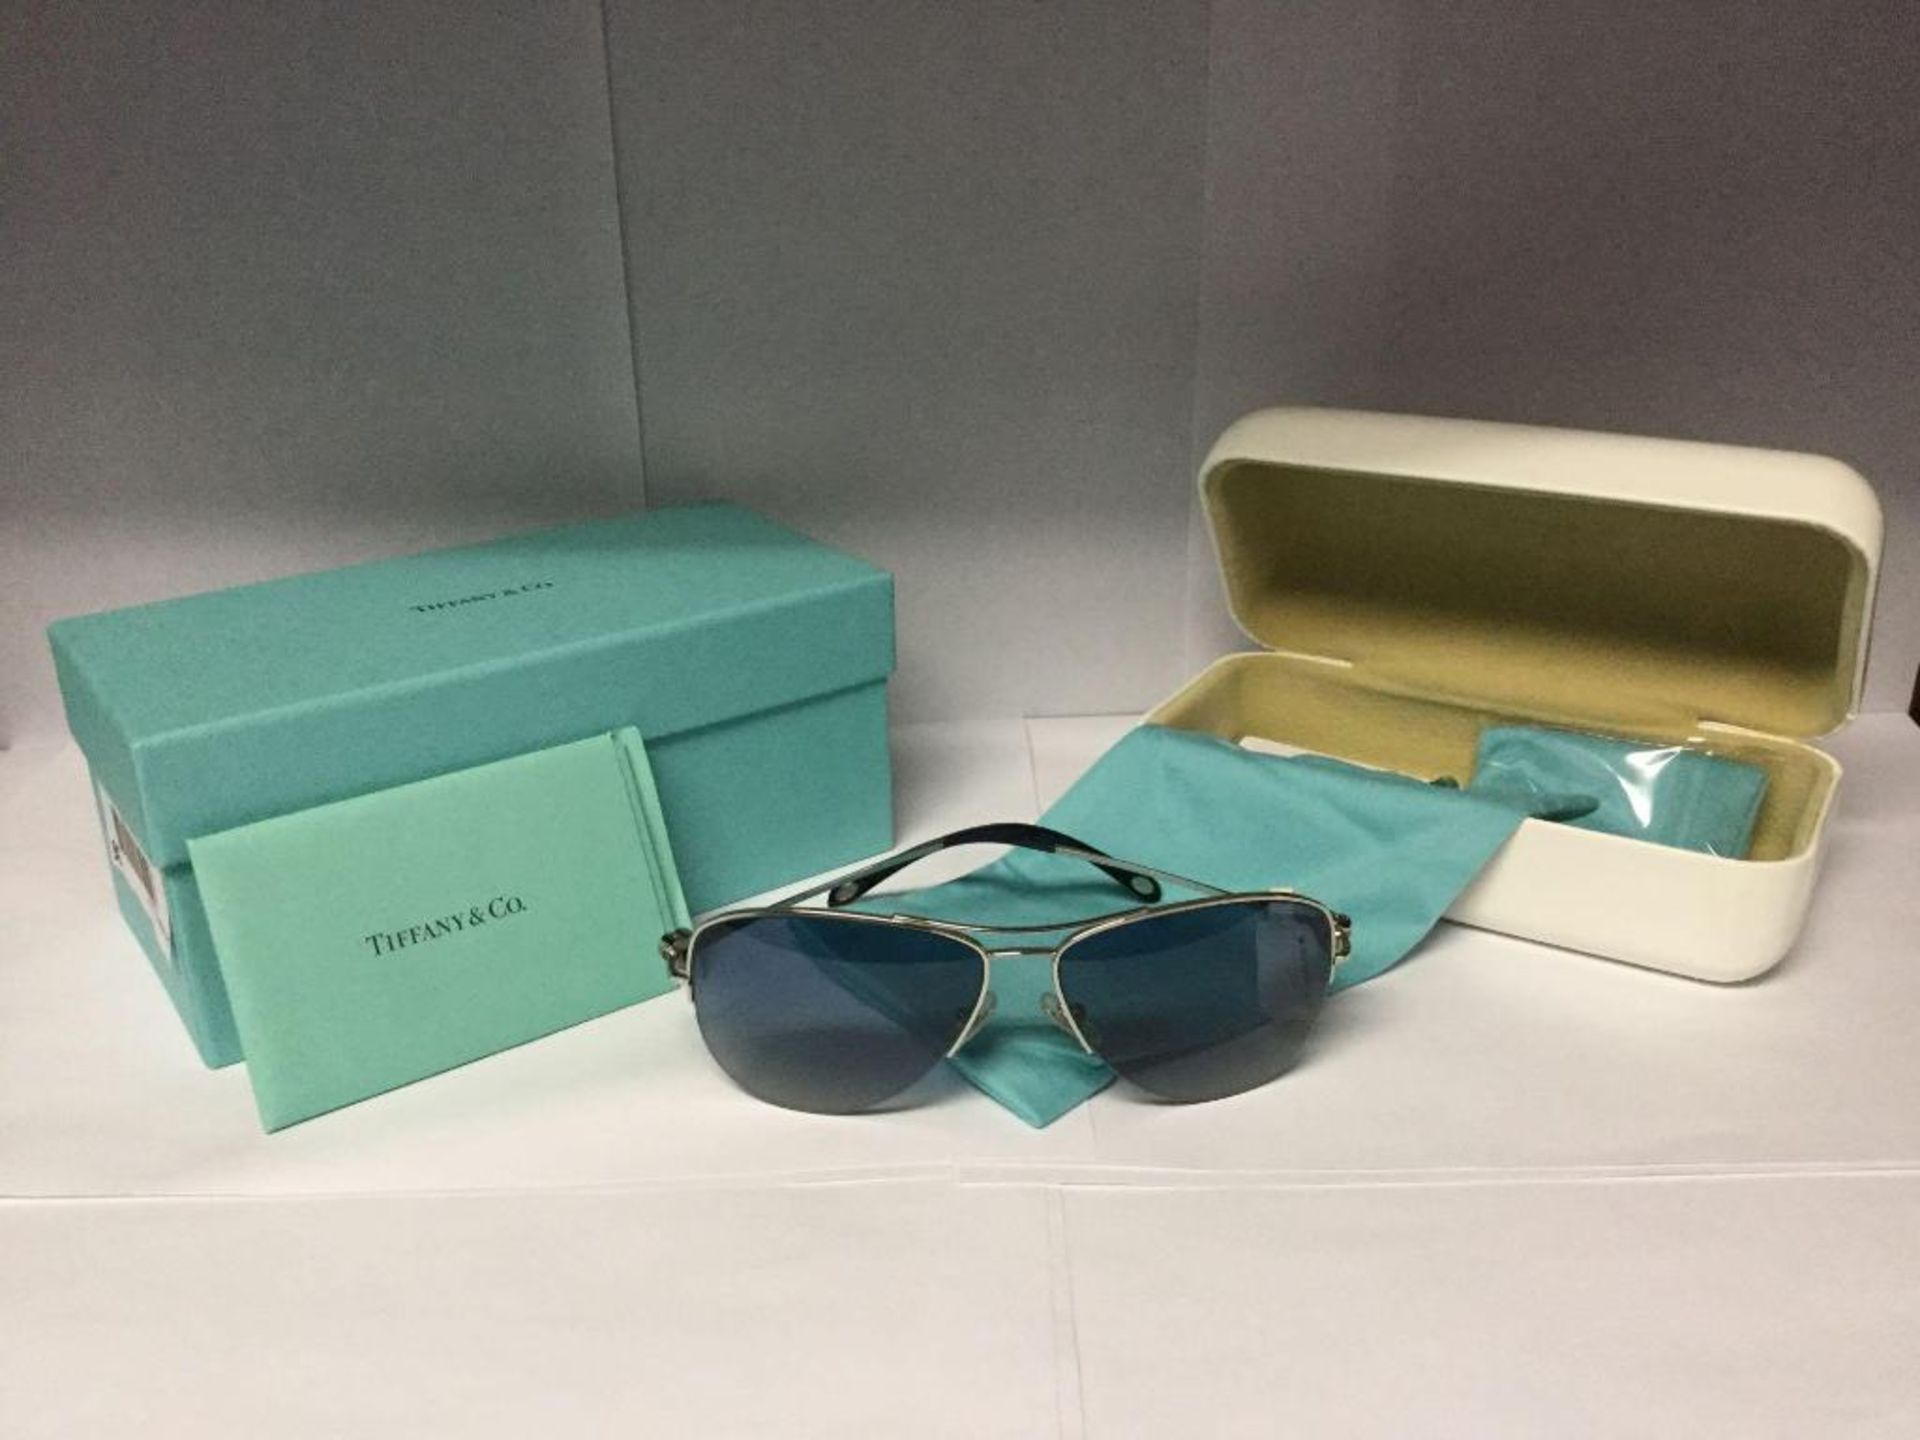 Tiffany and Co. Aviator Sunglasses with Case, Box and Bag - Value $245